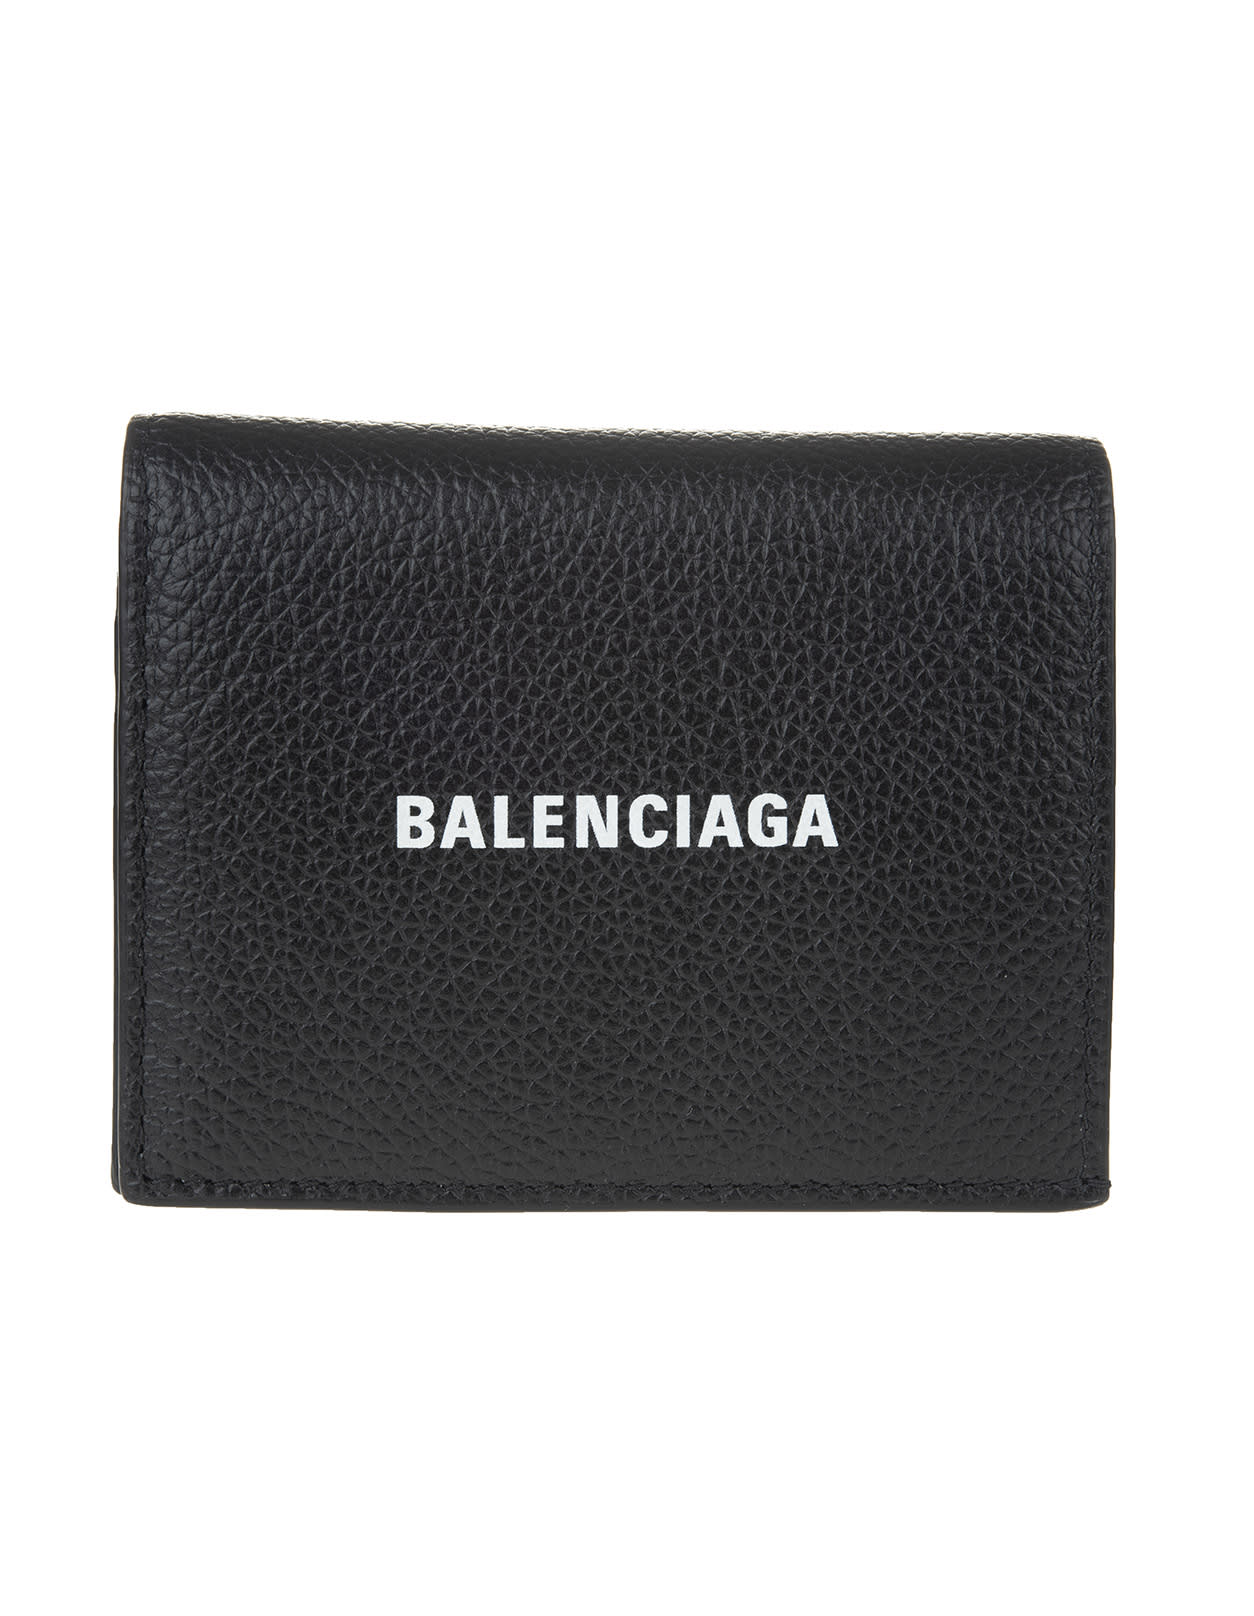 Balenciaga Black Folding Wallet In Textured Leather With Logo